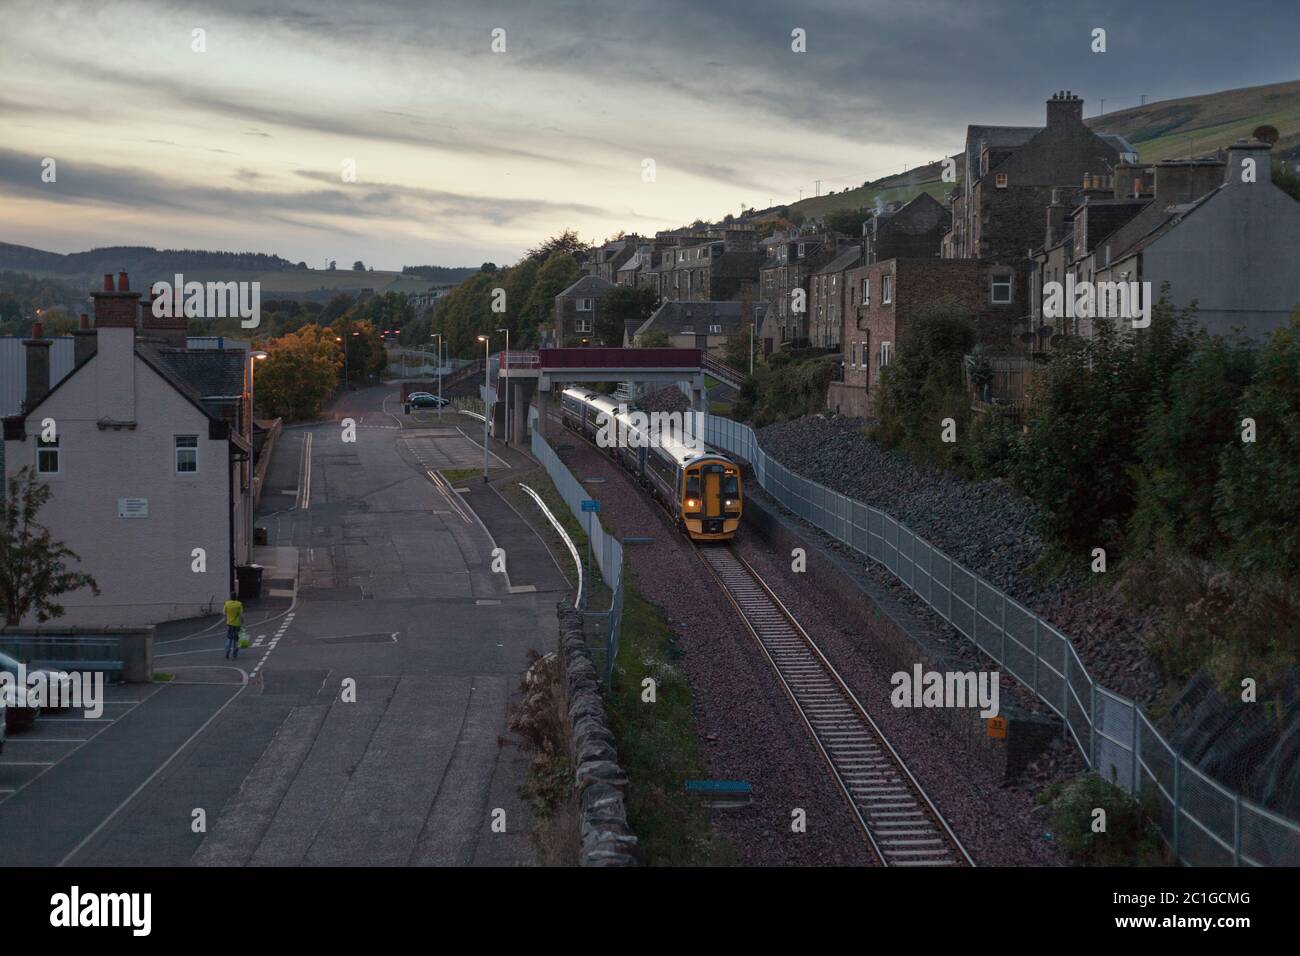 Scotrail class 158 train passing  through Galashiels in the Scottish borders on the reopened borders railway line Stock Photo